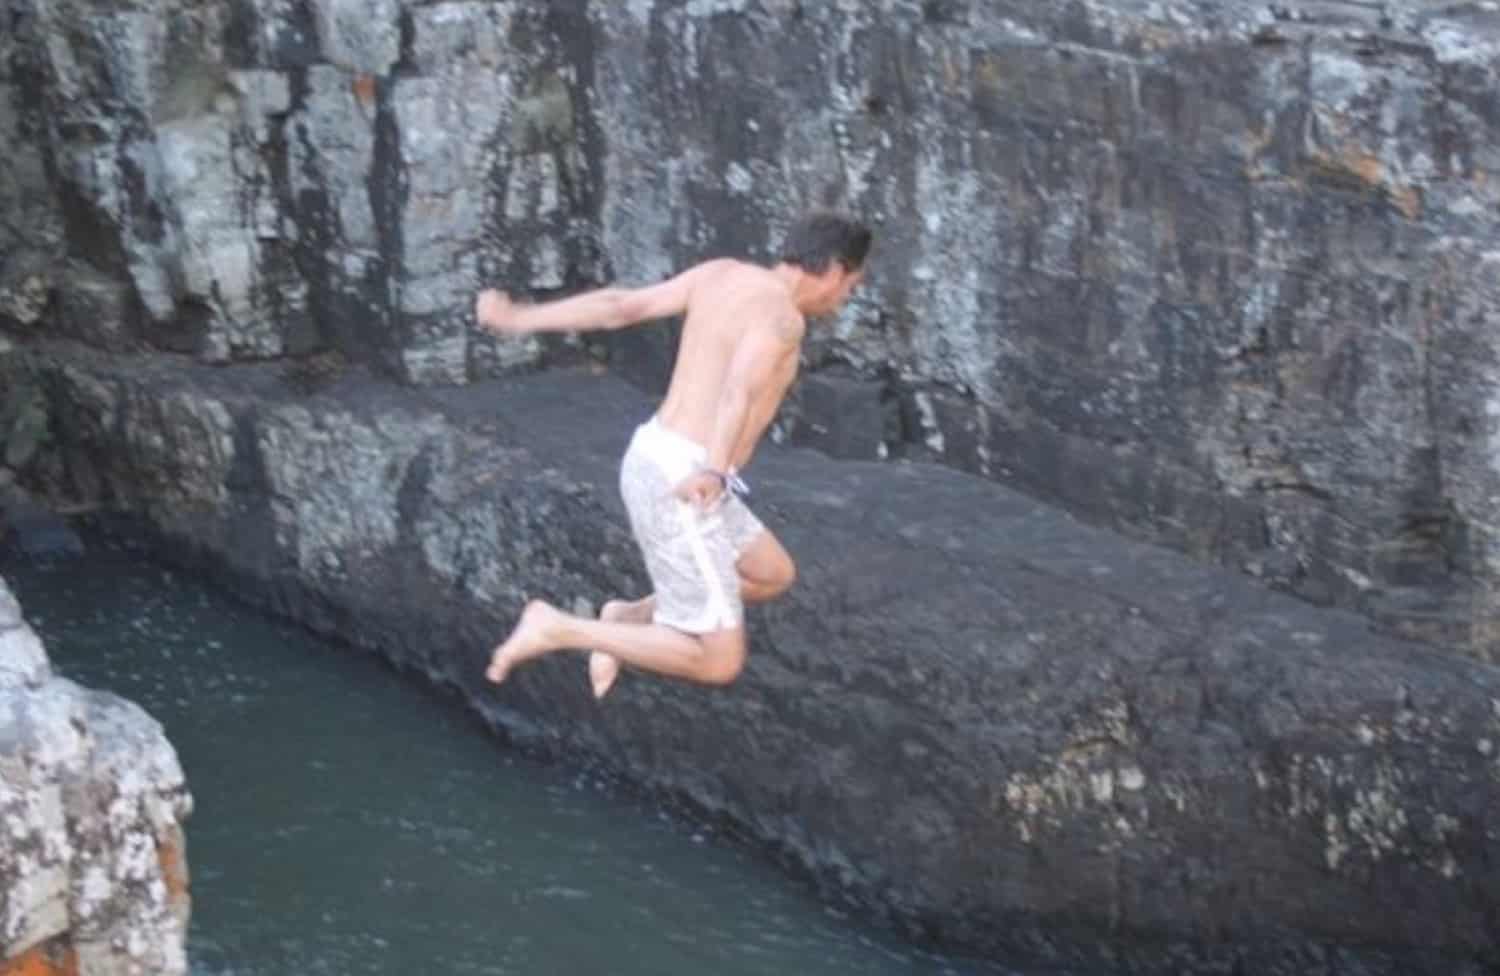 Guy cliff jumping